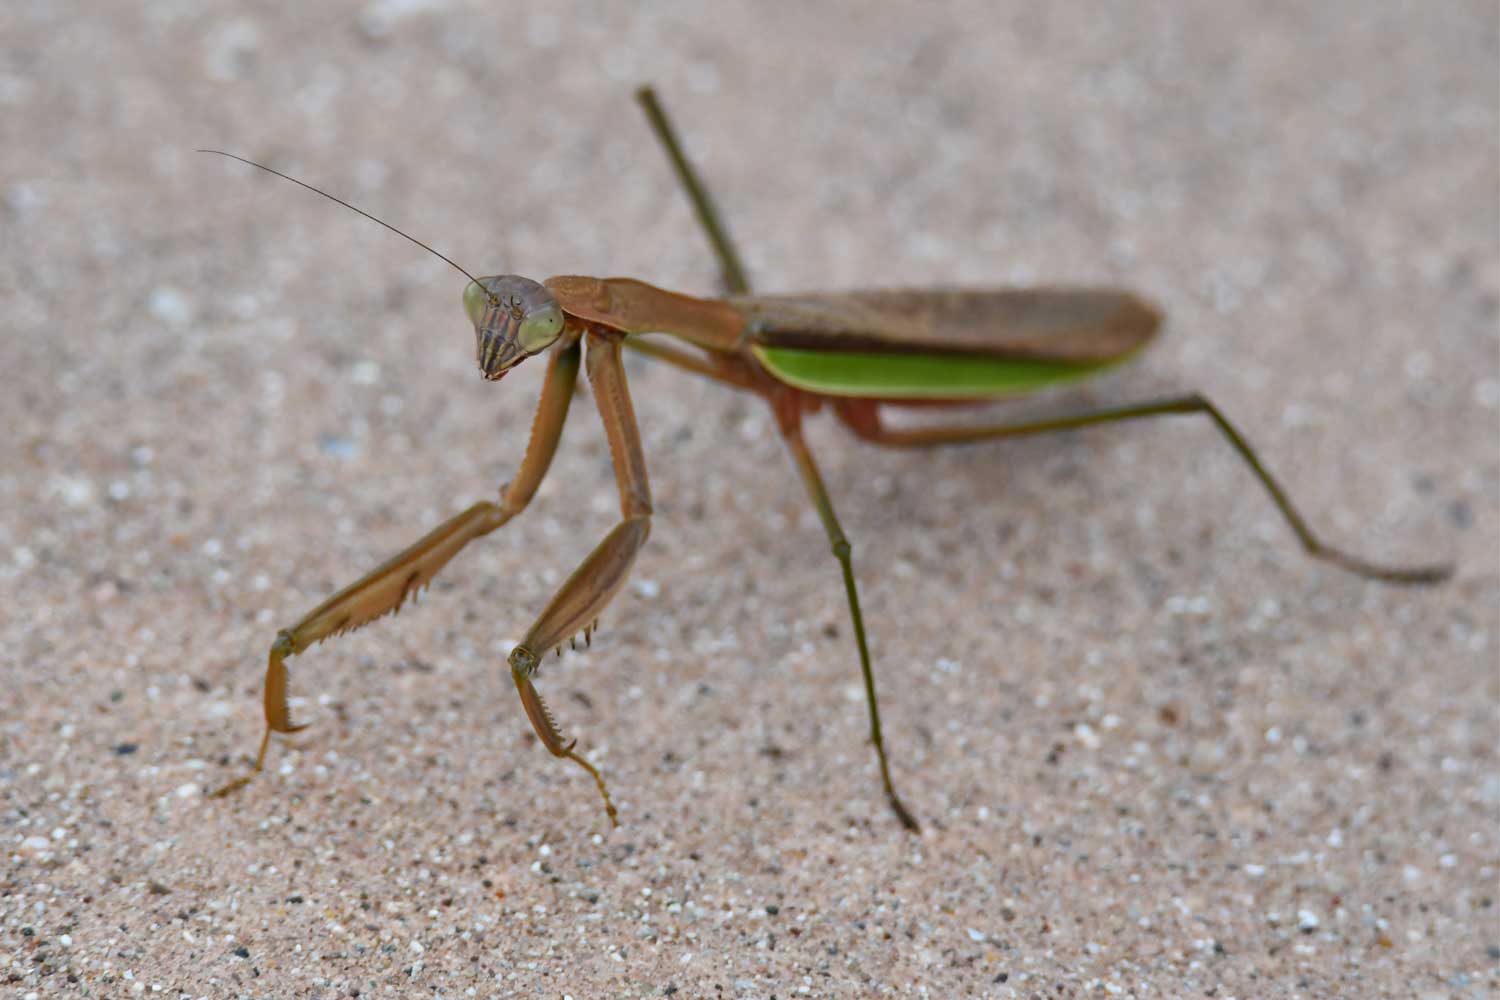 Creature feature: Praying mantis is perfectly designed for hunting 